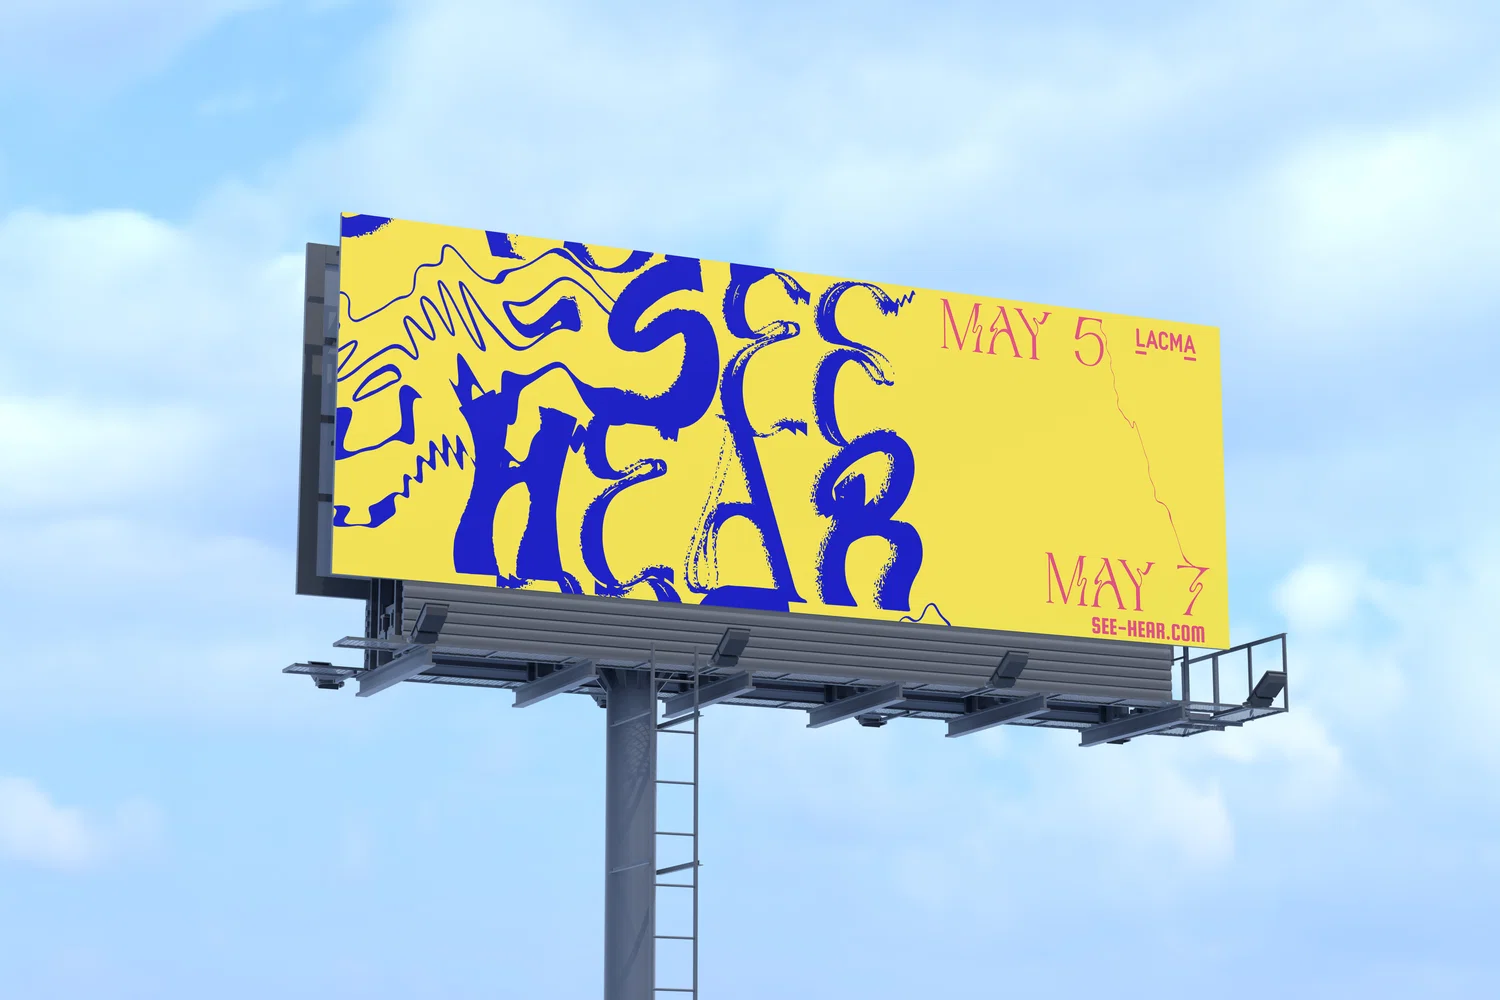 Billboard mockup. The sky can be seen in the background and a colorful blue and yellow ad in the front.